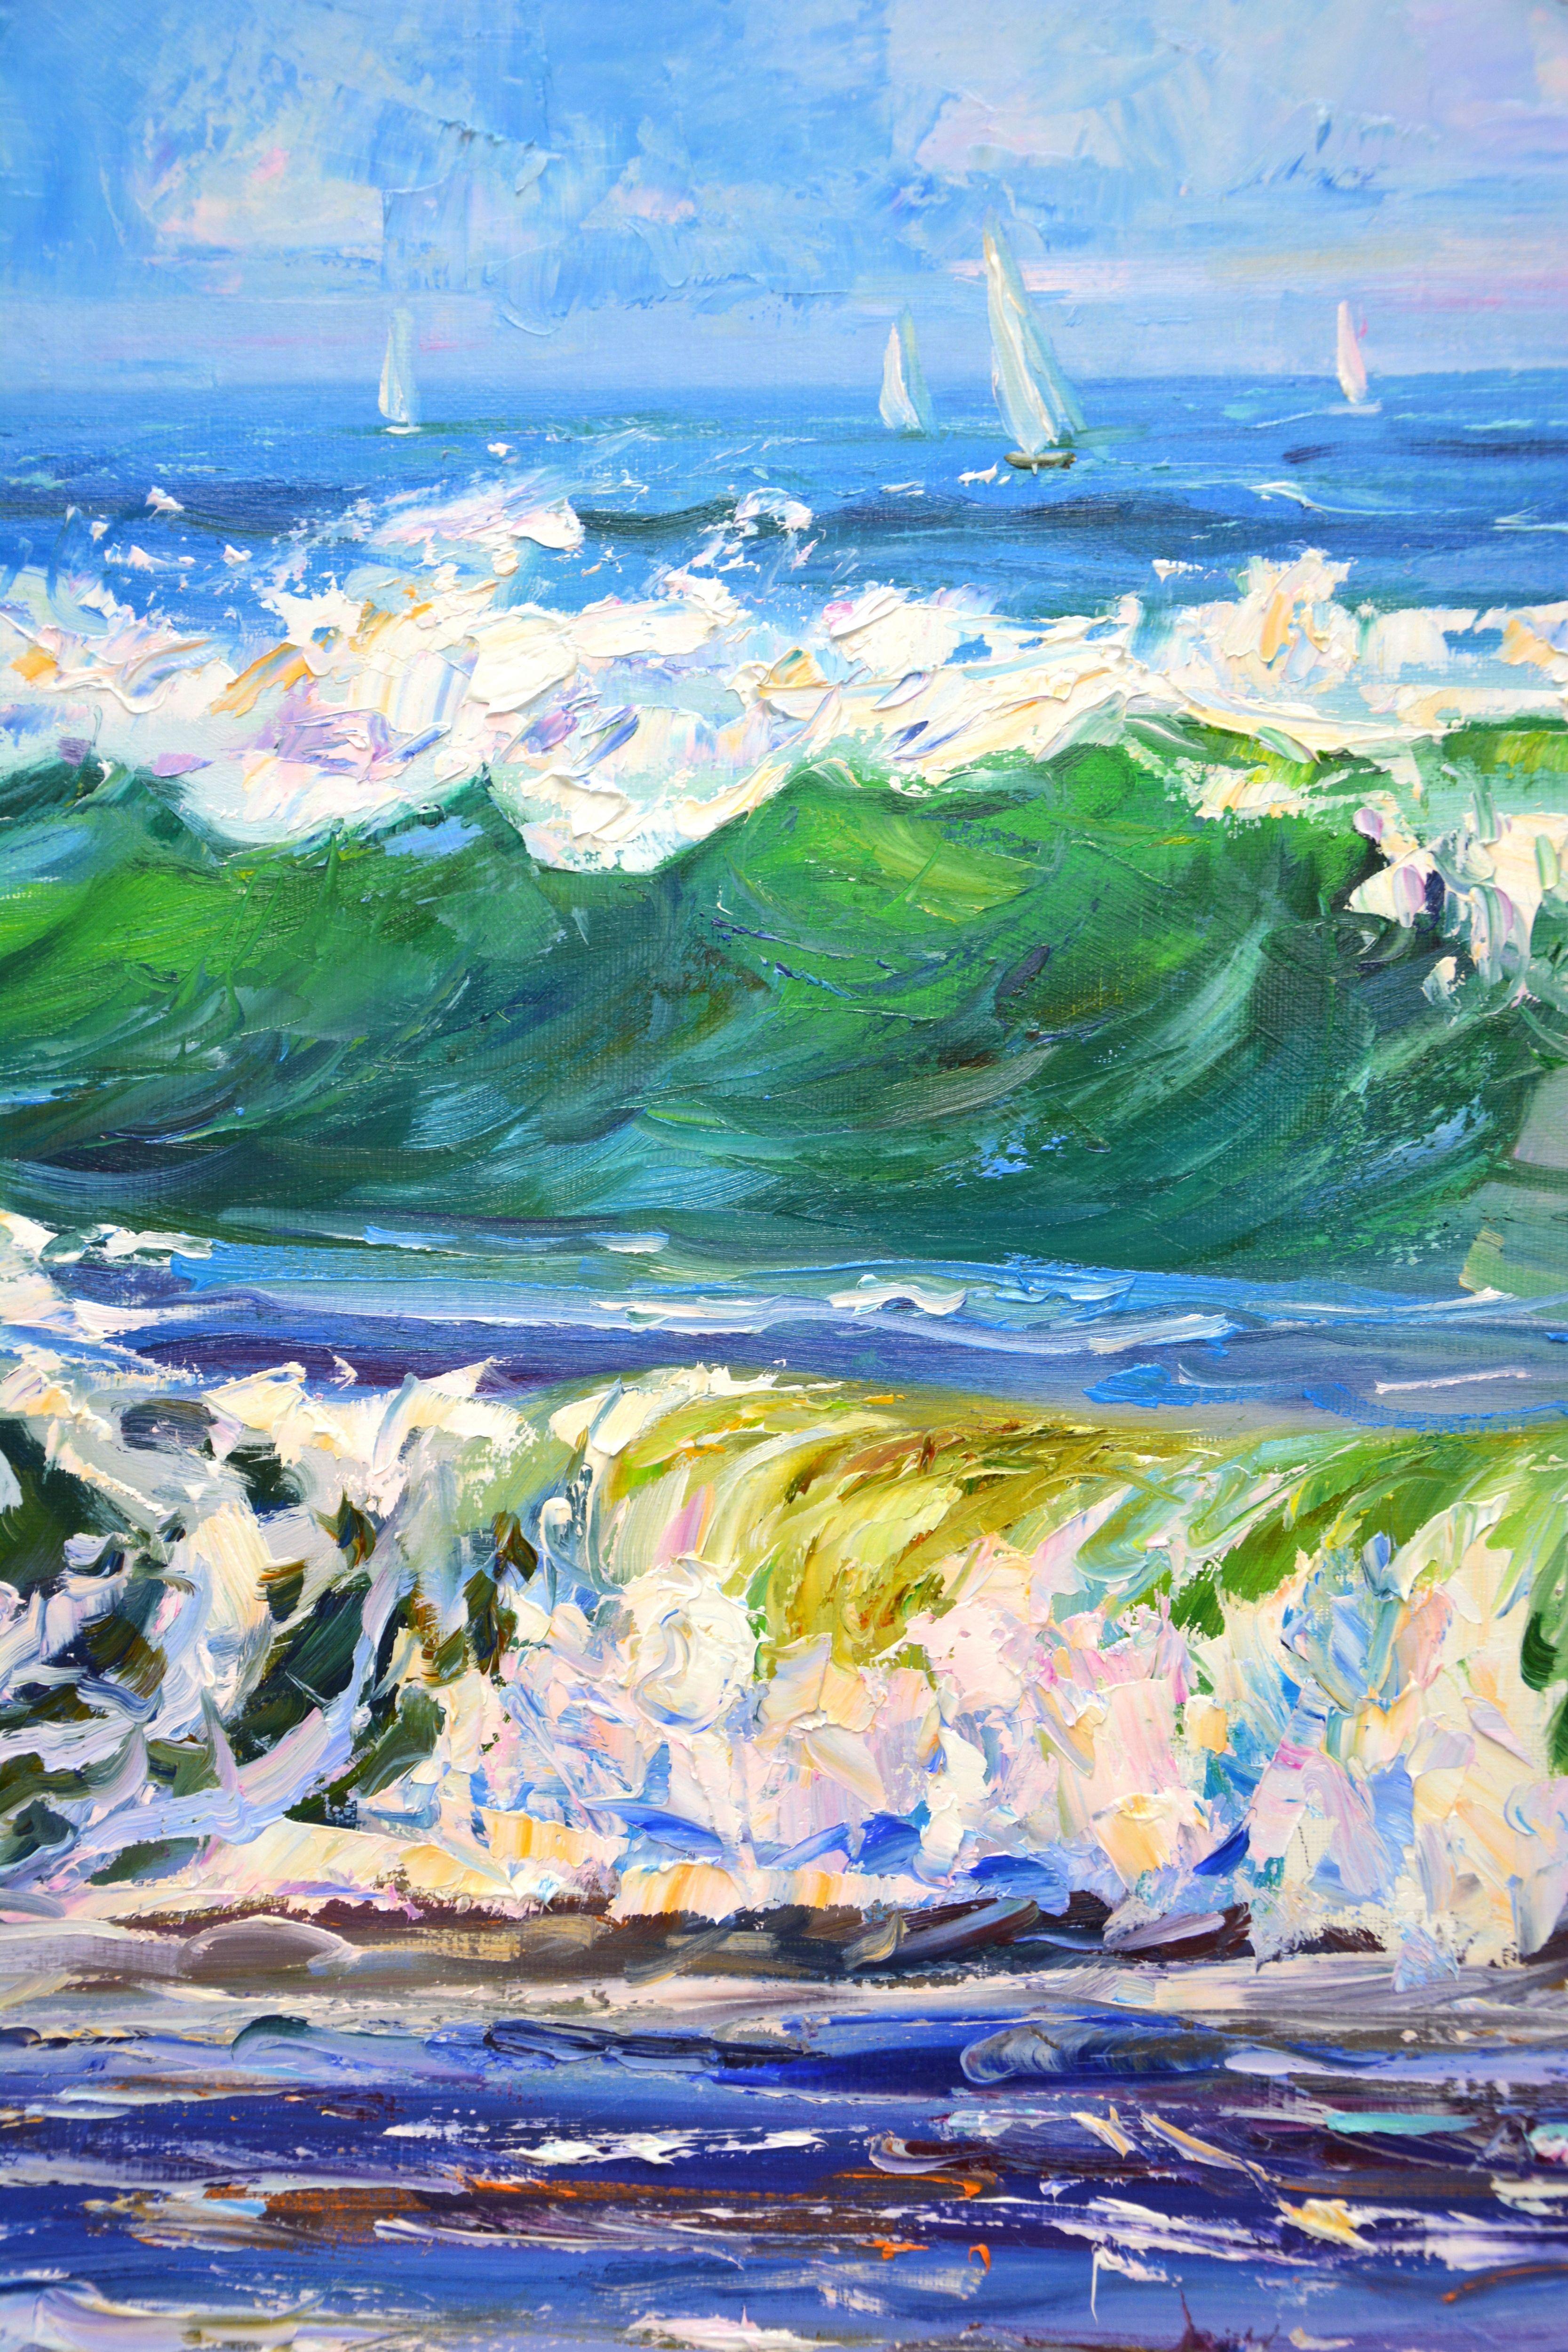 Waves, ocean. Sailboats. Sea foam. Impressionism: a palette of knives and a blue, green, white palette highlight the energy of the ocean. Part of a permanent series of seascapes. The picture is of good quality, the colors make children happy. Oil